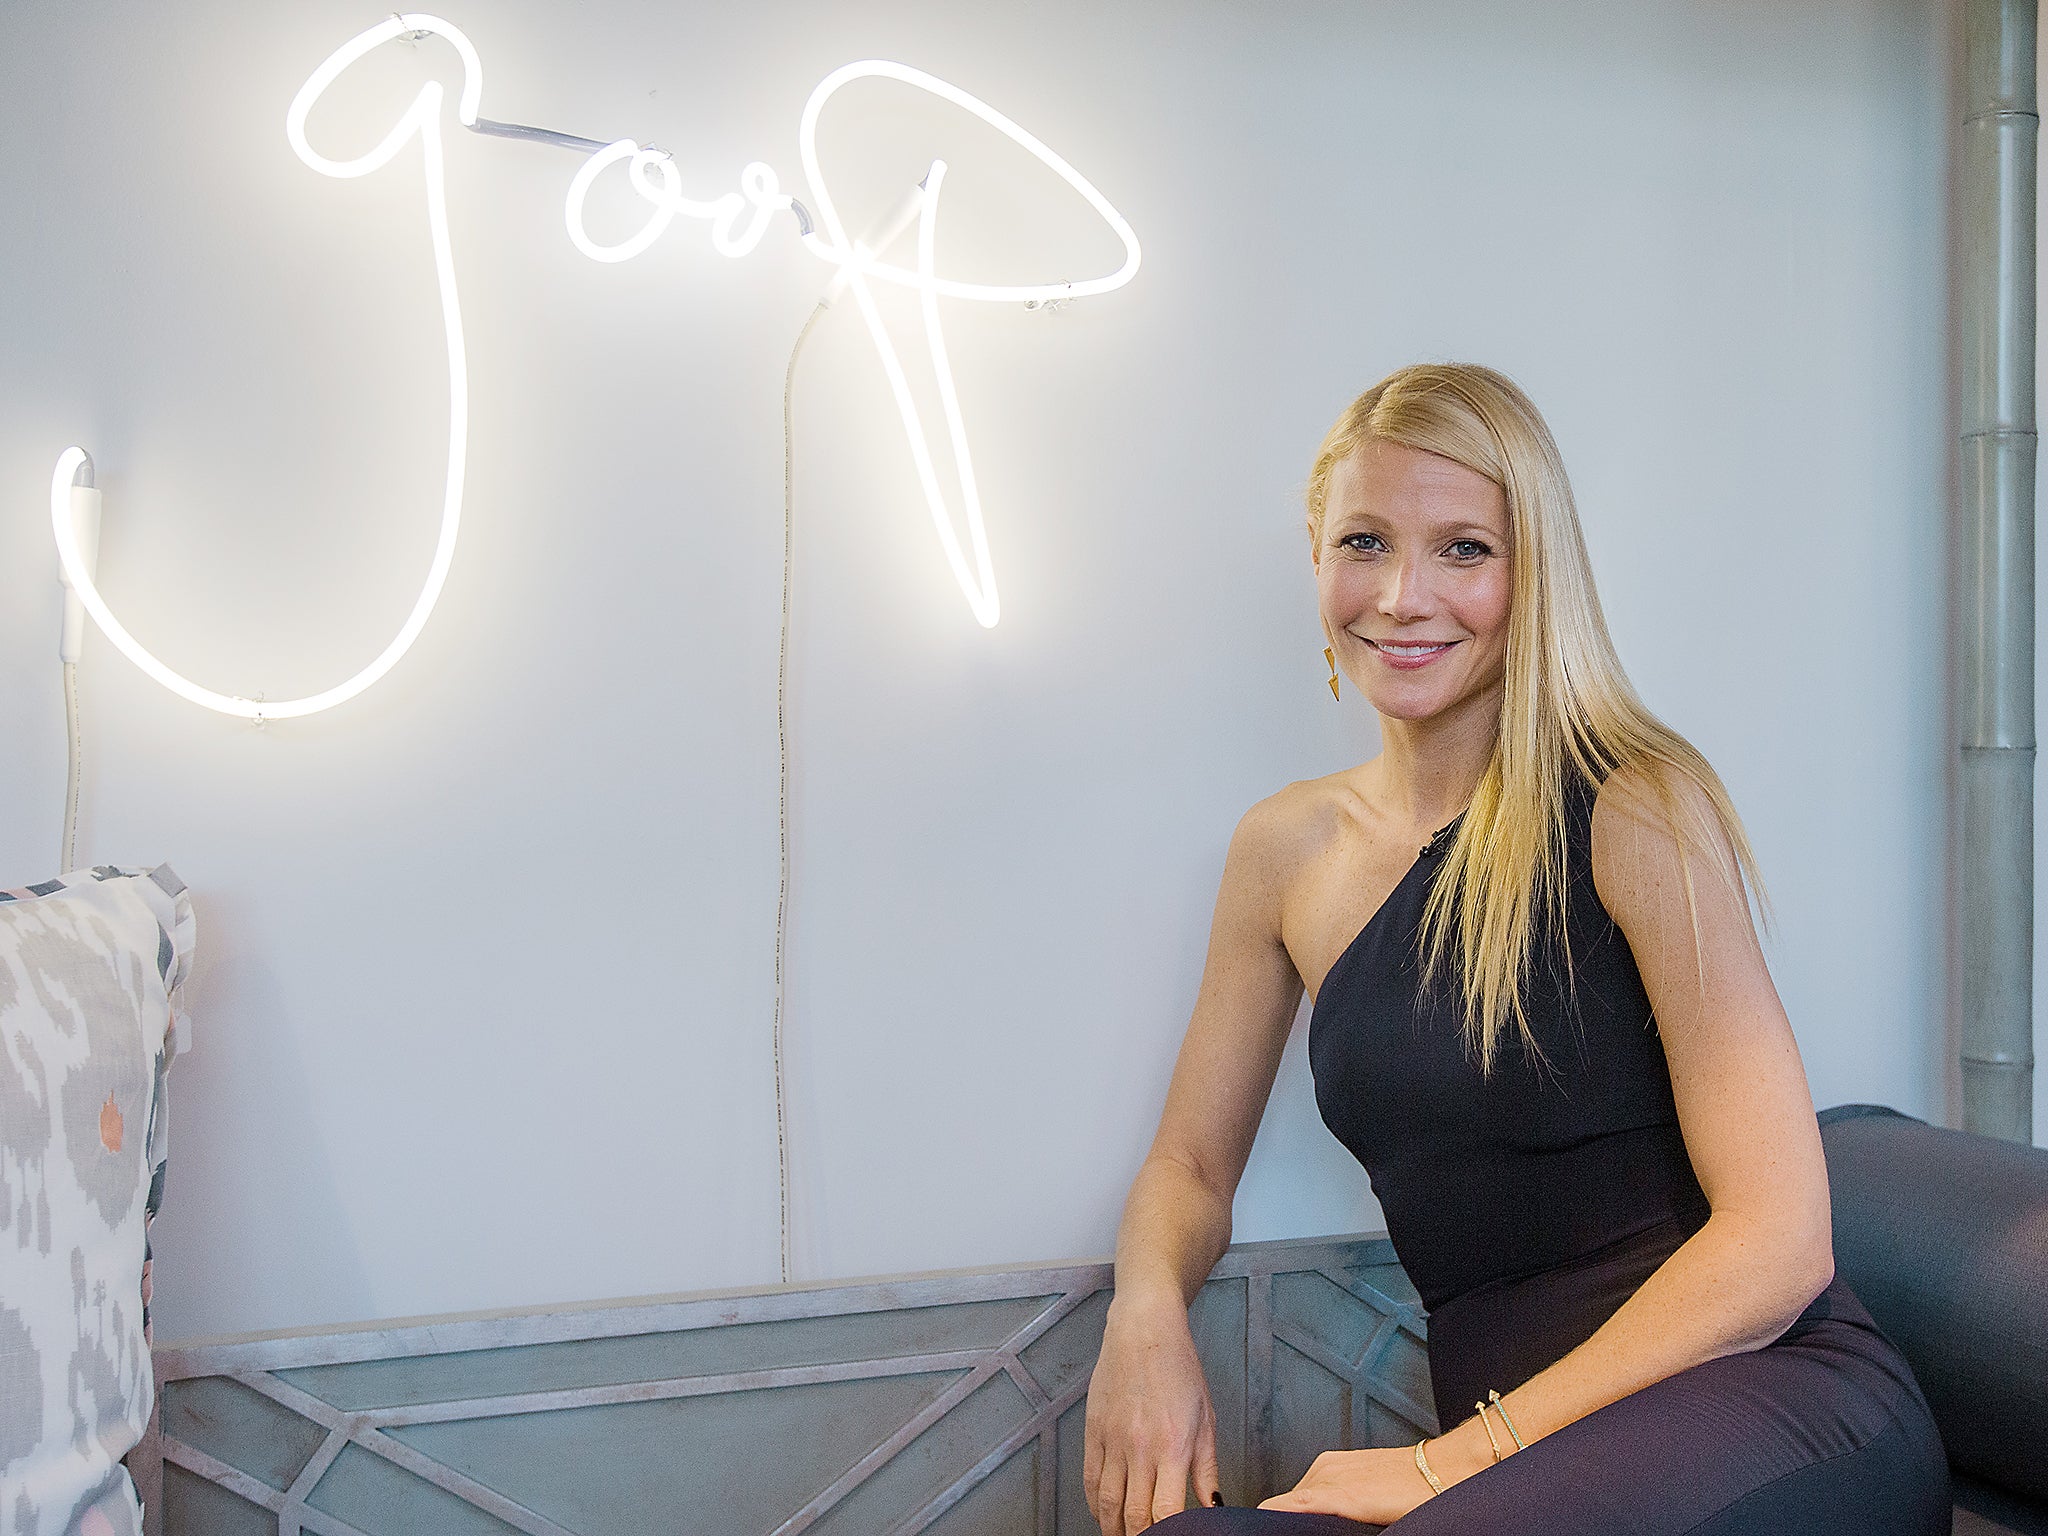 Ms Palthrow’s Goop, which combines e-commerce with blog entries about topics like wellness and health, is one example of the online branding businesses Felix is interested in